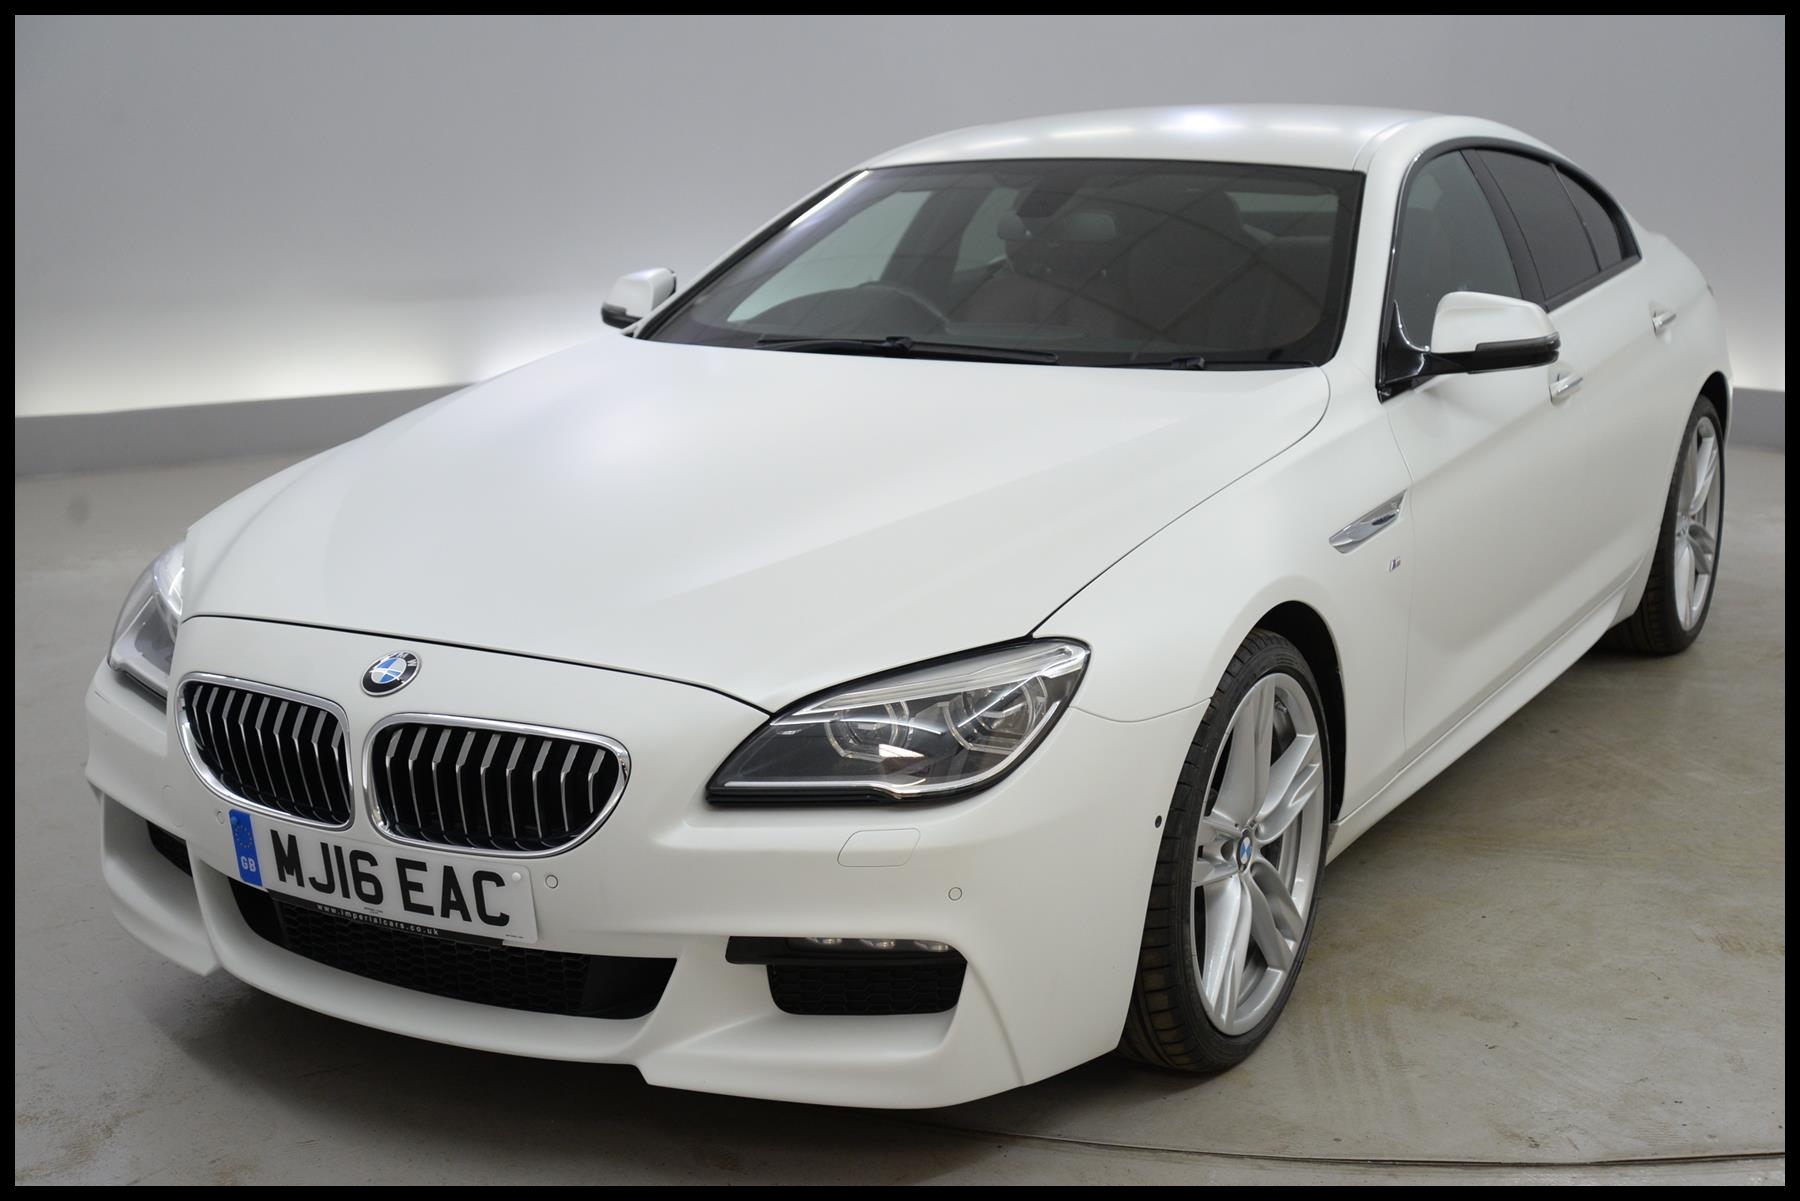 Used 2016 BMW 6 Series Gran Coupe 640d M Sport 4dr Auto NAPPA LEATHER HEAD UP DISPLAY FORT SEATS A for sale in Suffolk